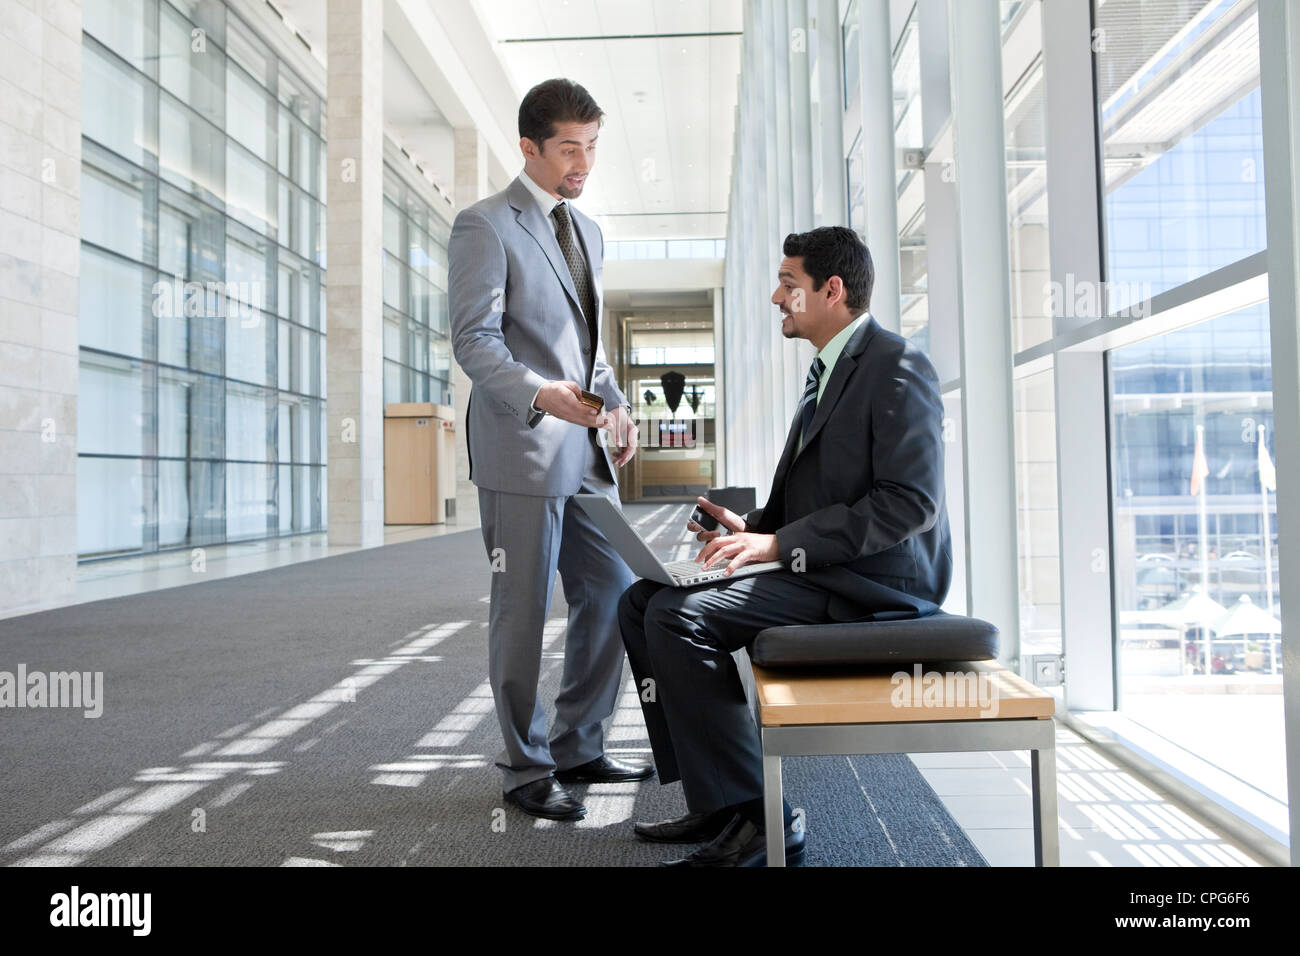 Two businessmen talking in the office hallway. Stock Photo